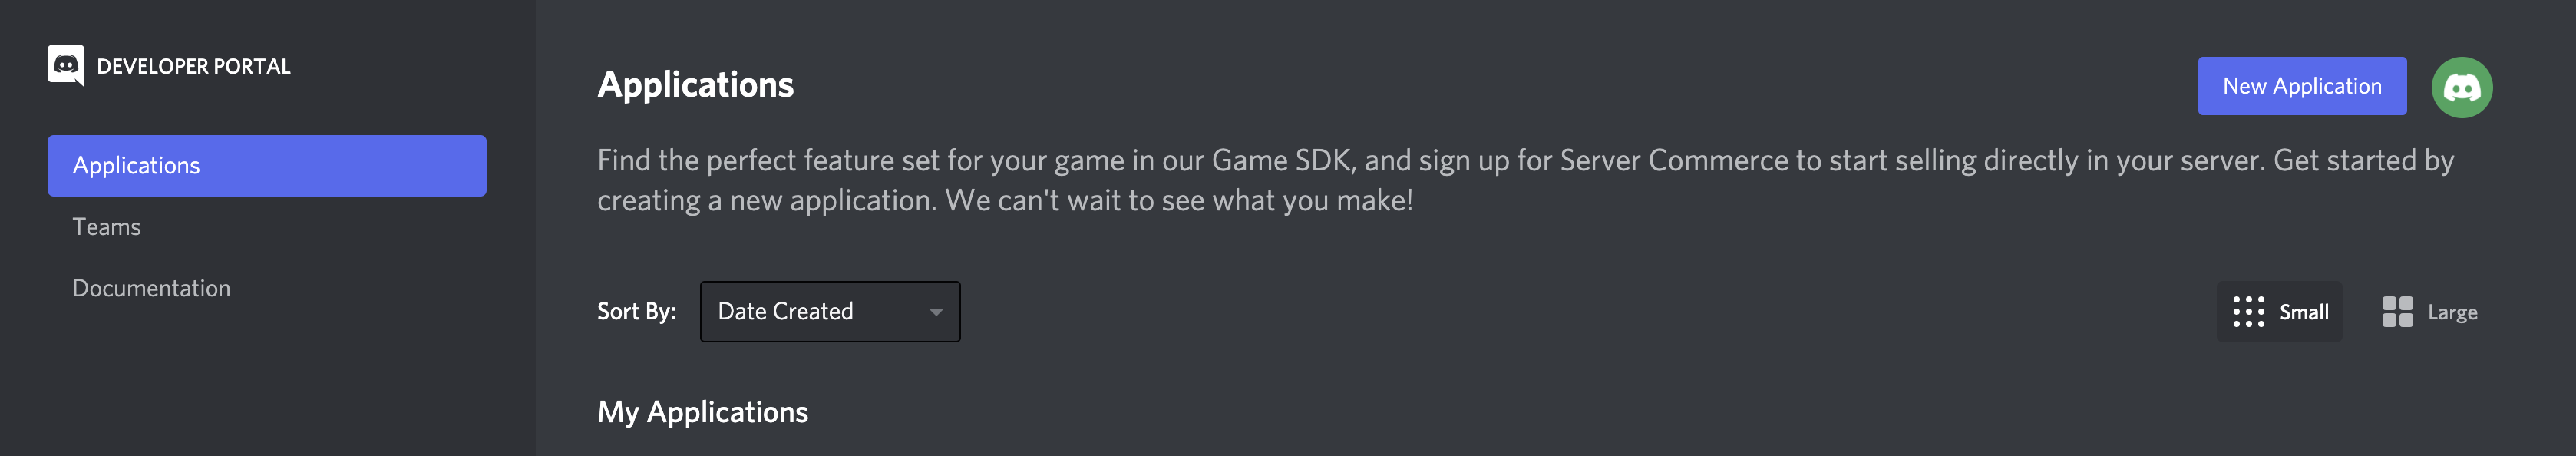 New Application In Discord